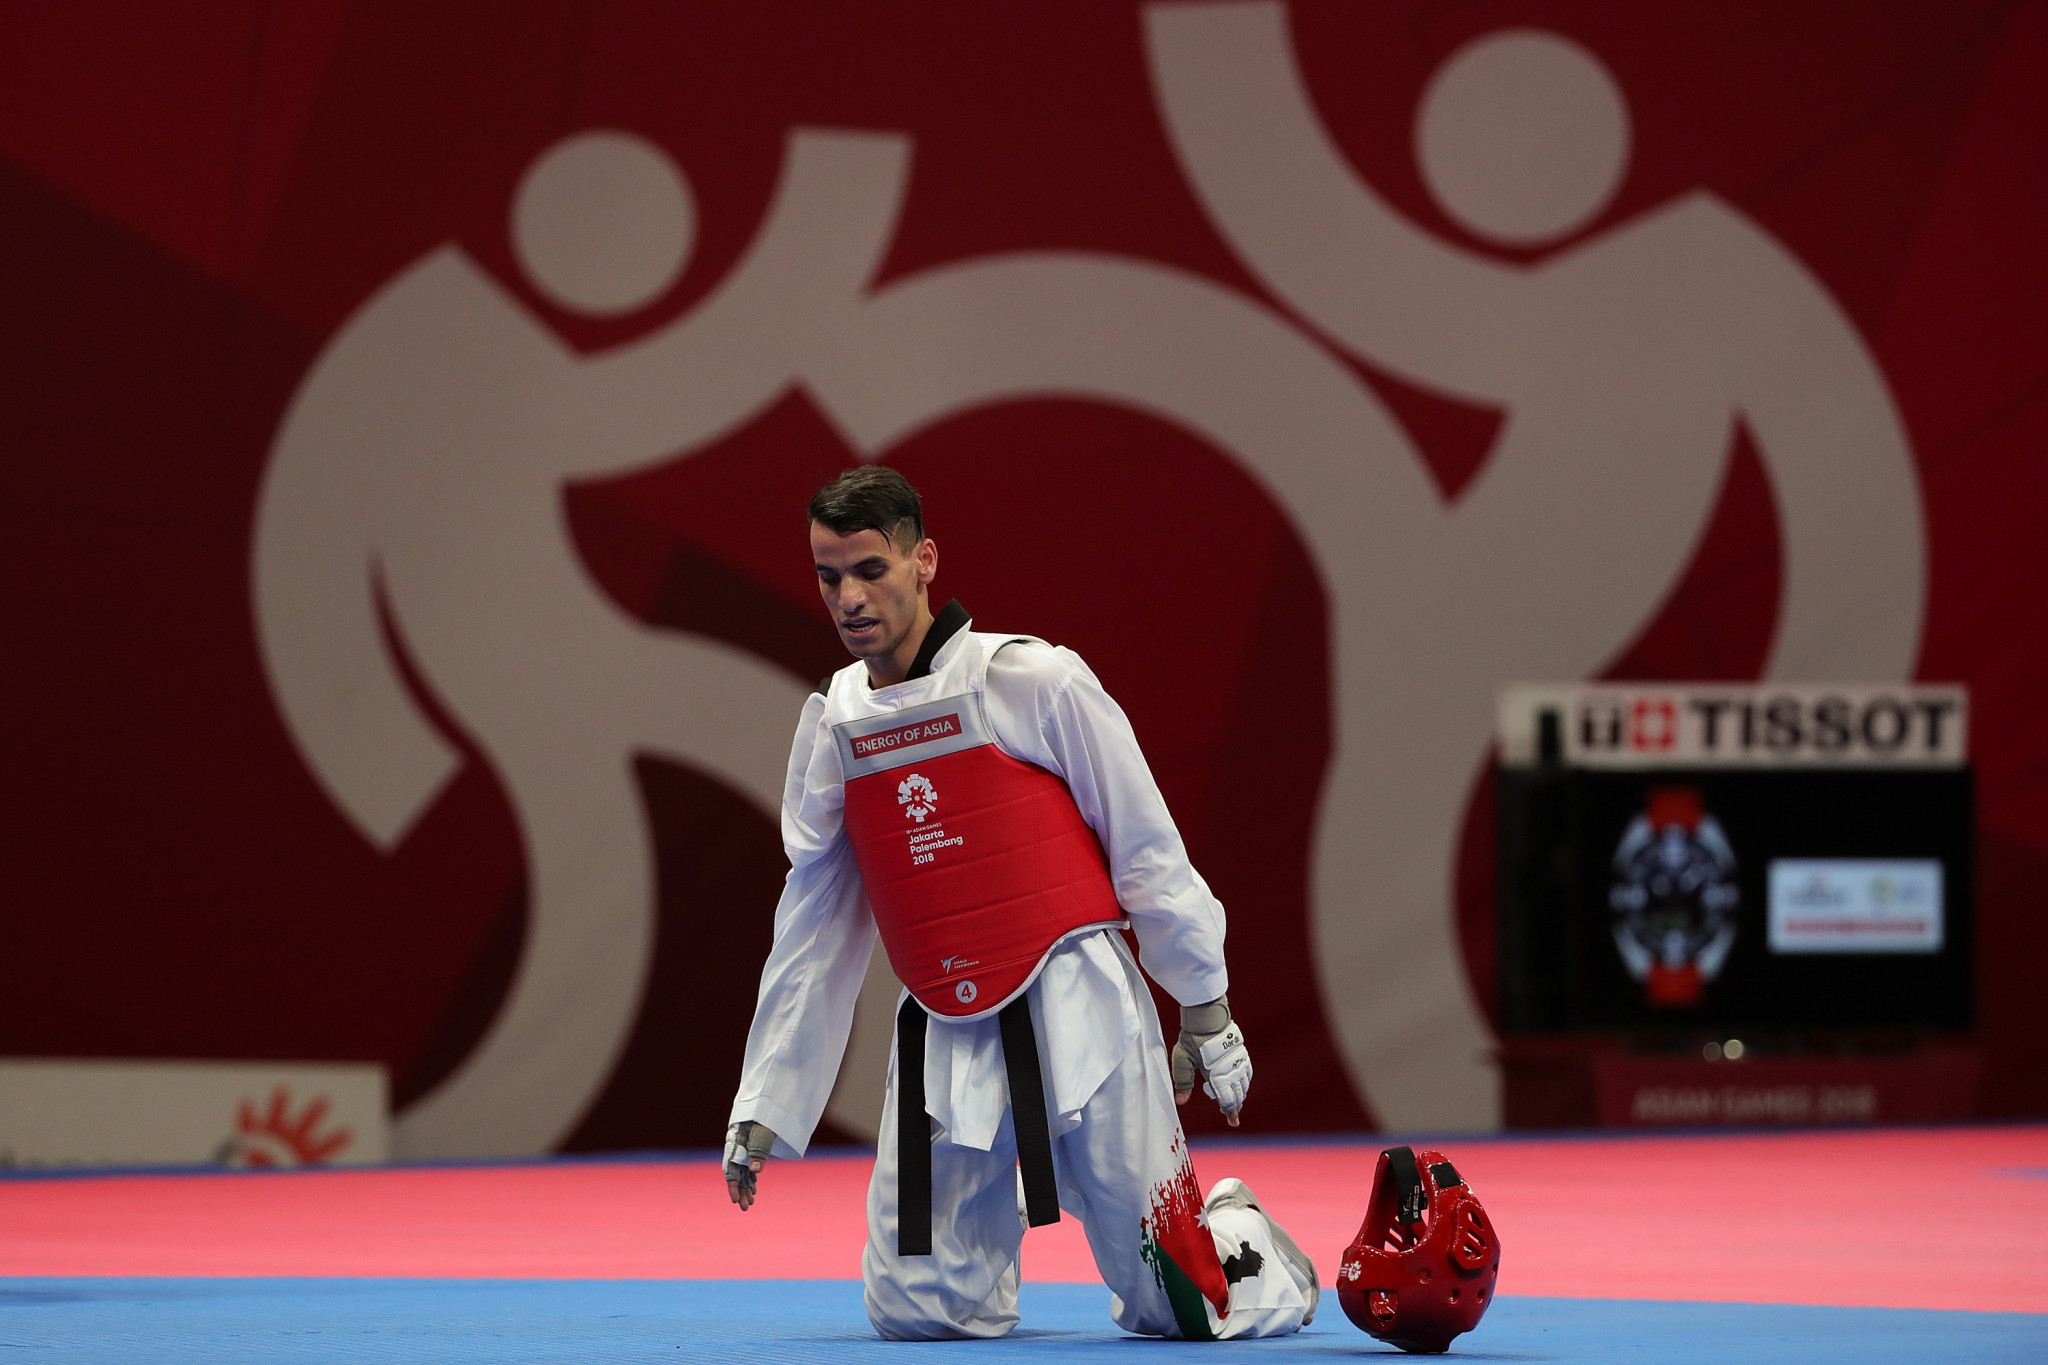 Olympic champion Ahmad Abughaush was one of three taekwondo athletes recognised at the signing ceremony ©Getty Images